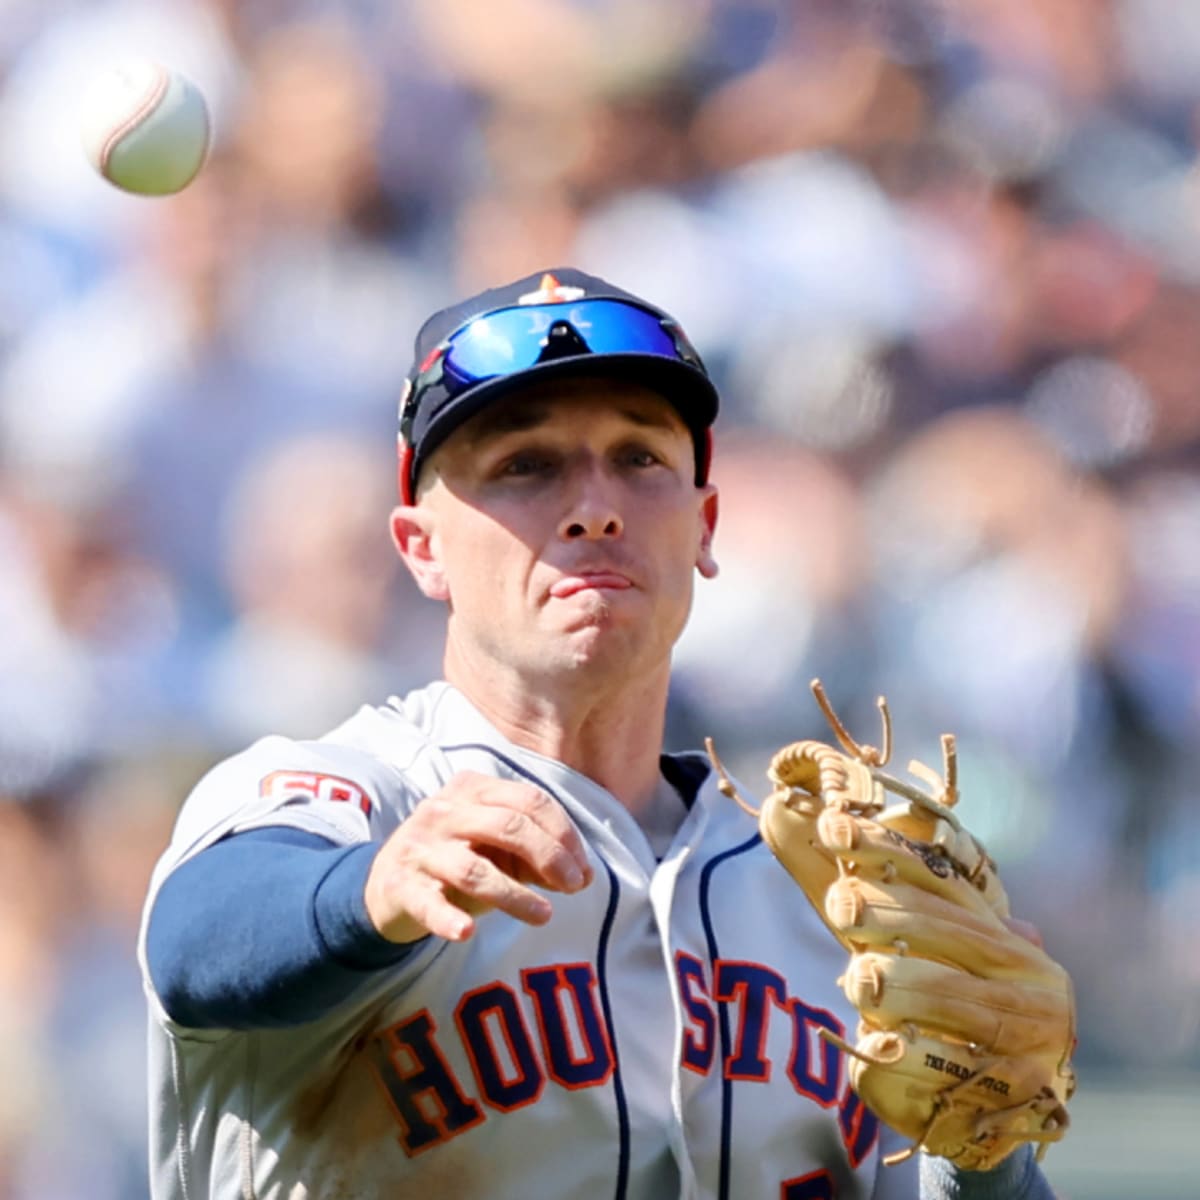 Astros' Bregman Gives Advice on How to Play Third Base to Young Fan -  Sports Illustrated